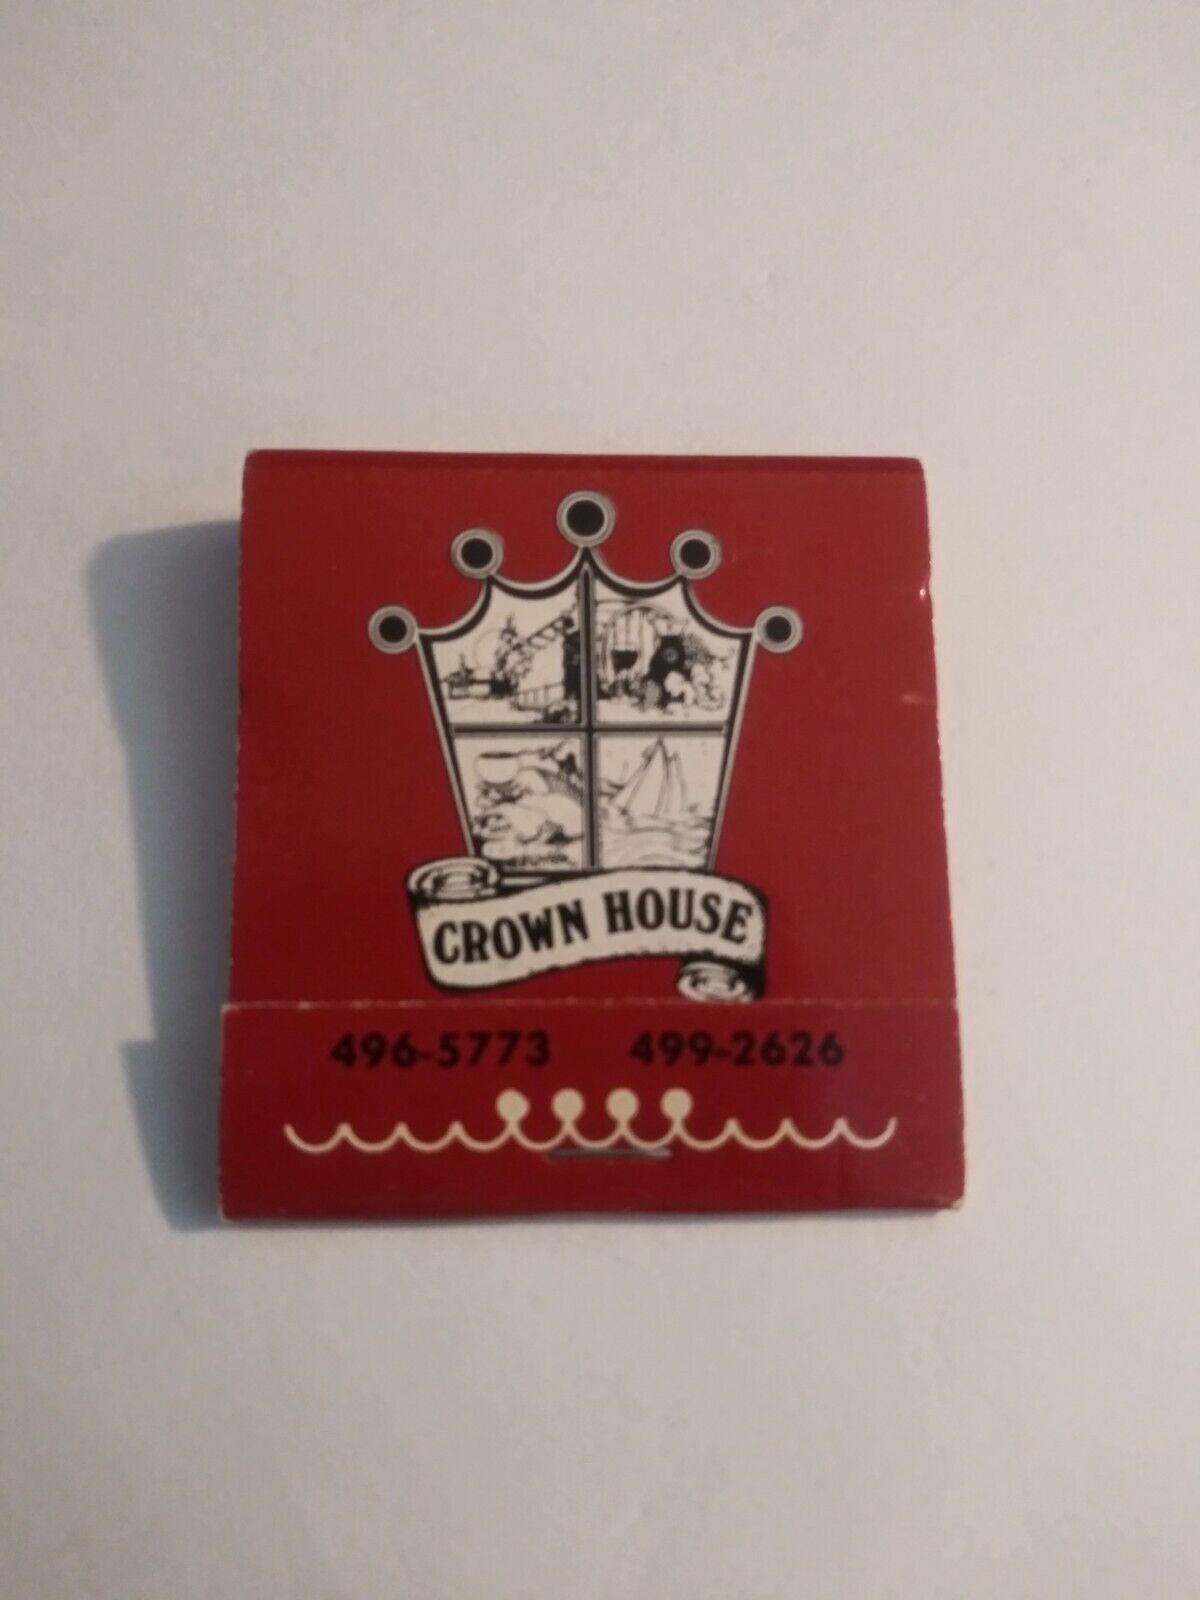 Vintage Matches From The Crown House Gourmet Restaurant Laguna Niguel California